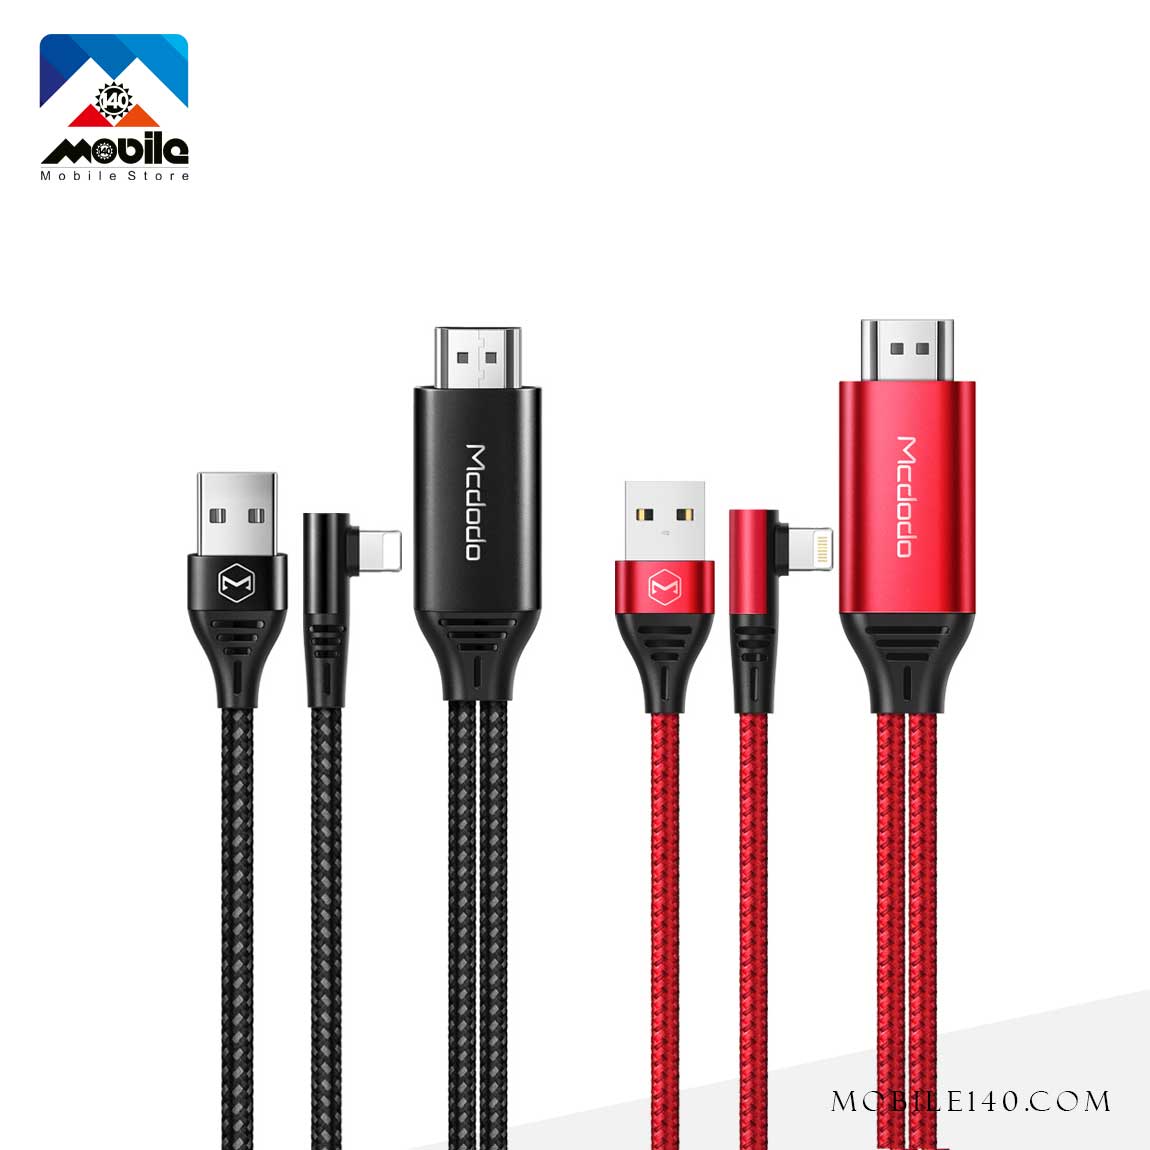 Macdodo CA-640 Lightning to HDMI and USB Cable 3